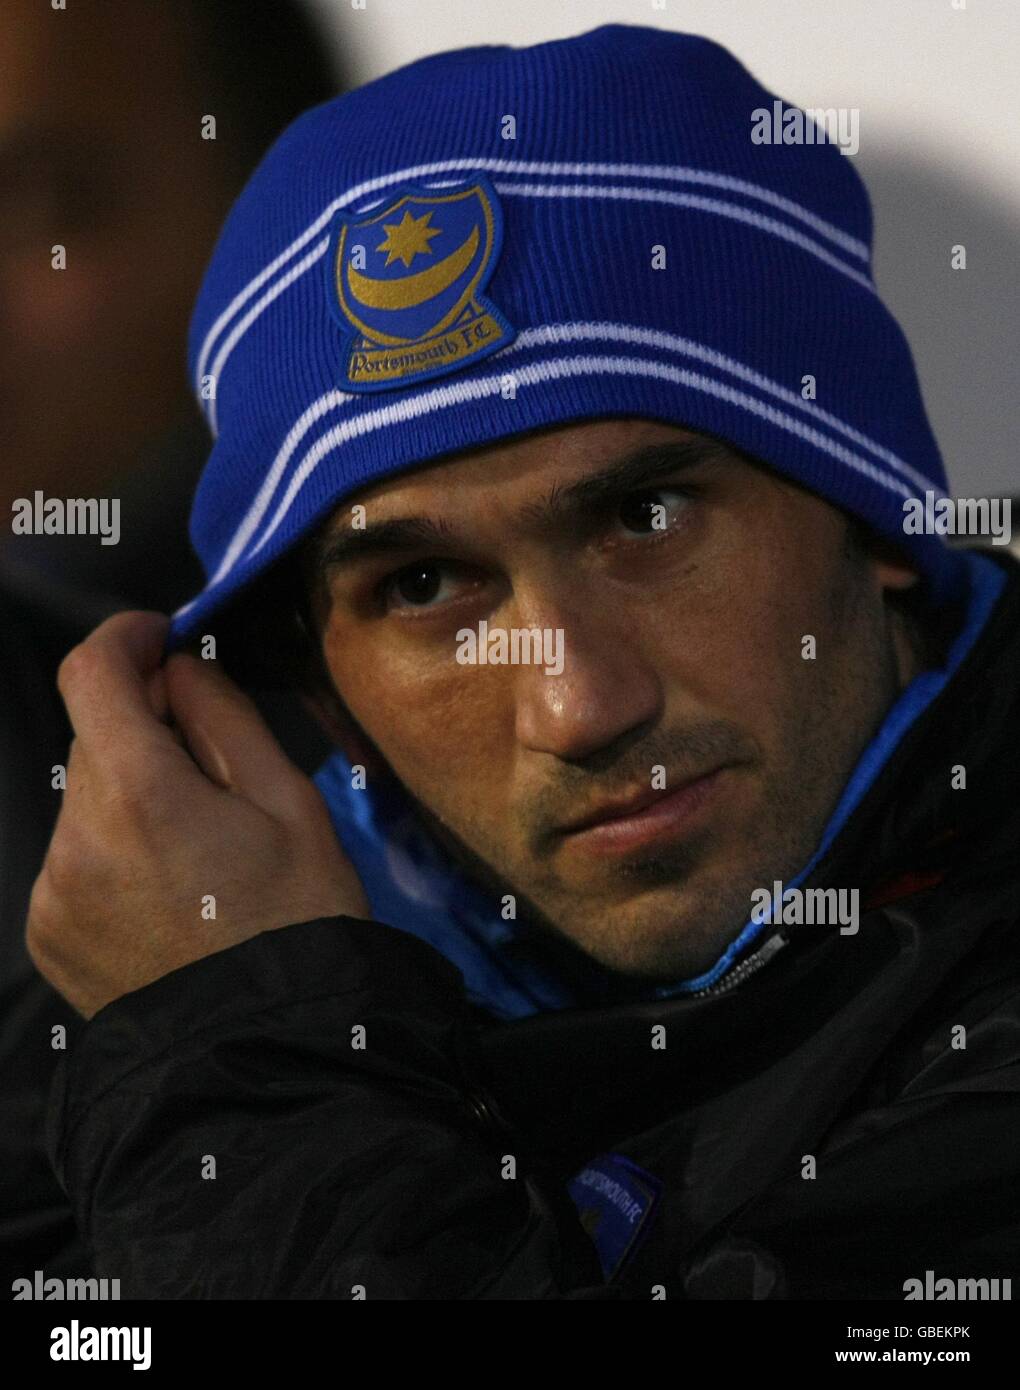 Soccer - Barclays Premier League - Portsmouth v Liverpool - Fratton Park. Portsmouth's new signing Theofanis Gekas on the bench. Stock Photo